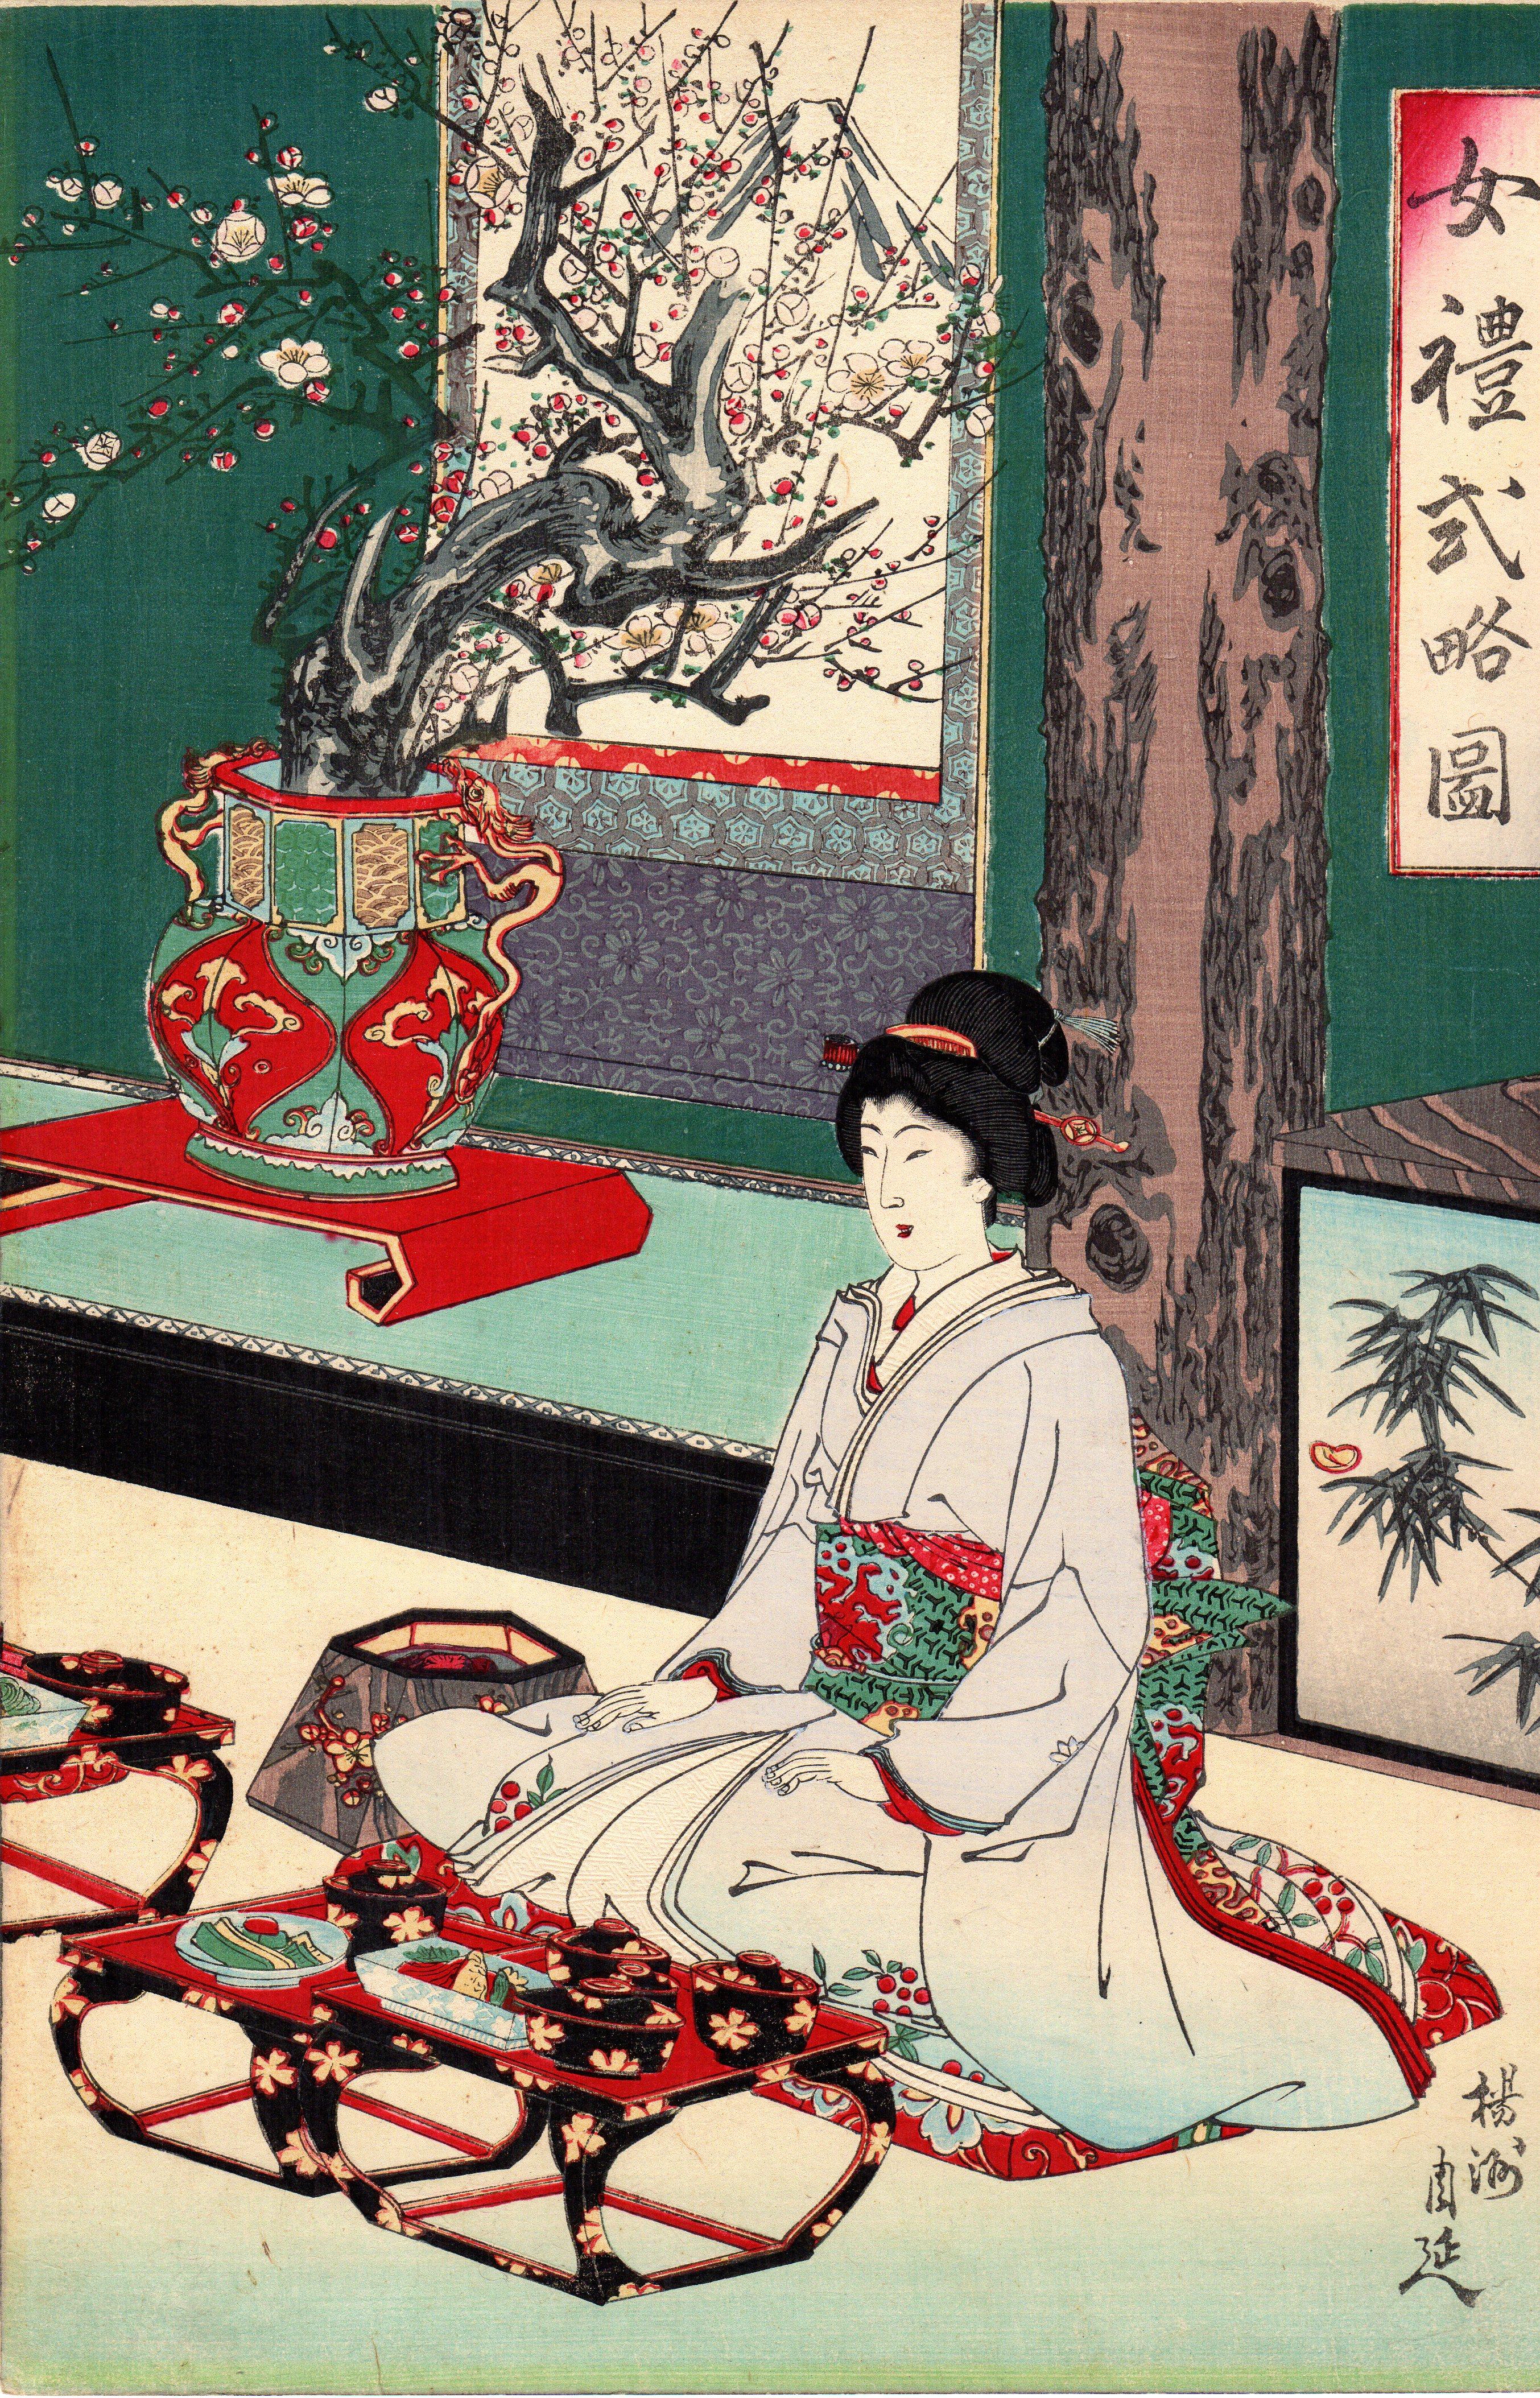 Original Japanese Triptych Color Woodblock Print by Toyohara Chikanobu
- Title: New Year's Dishes: Etiquette of a Lady
- Publisher: Takekawa Unosuke
Date: Late 19th century
Size: 3 of 9.25